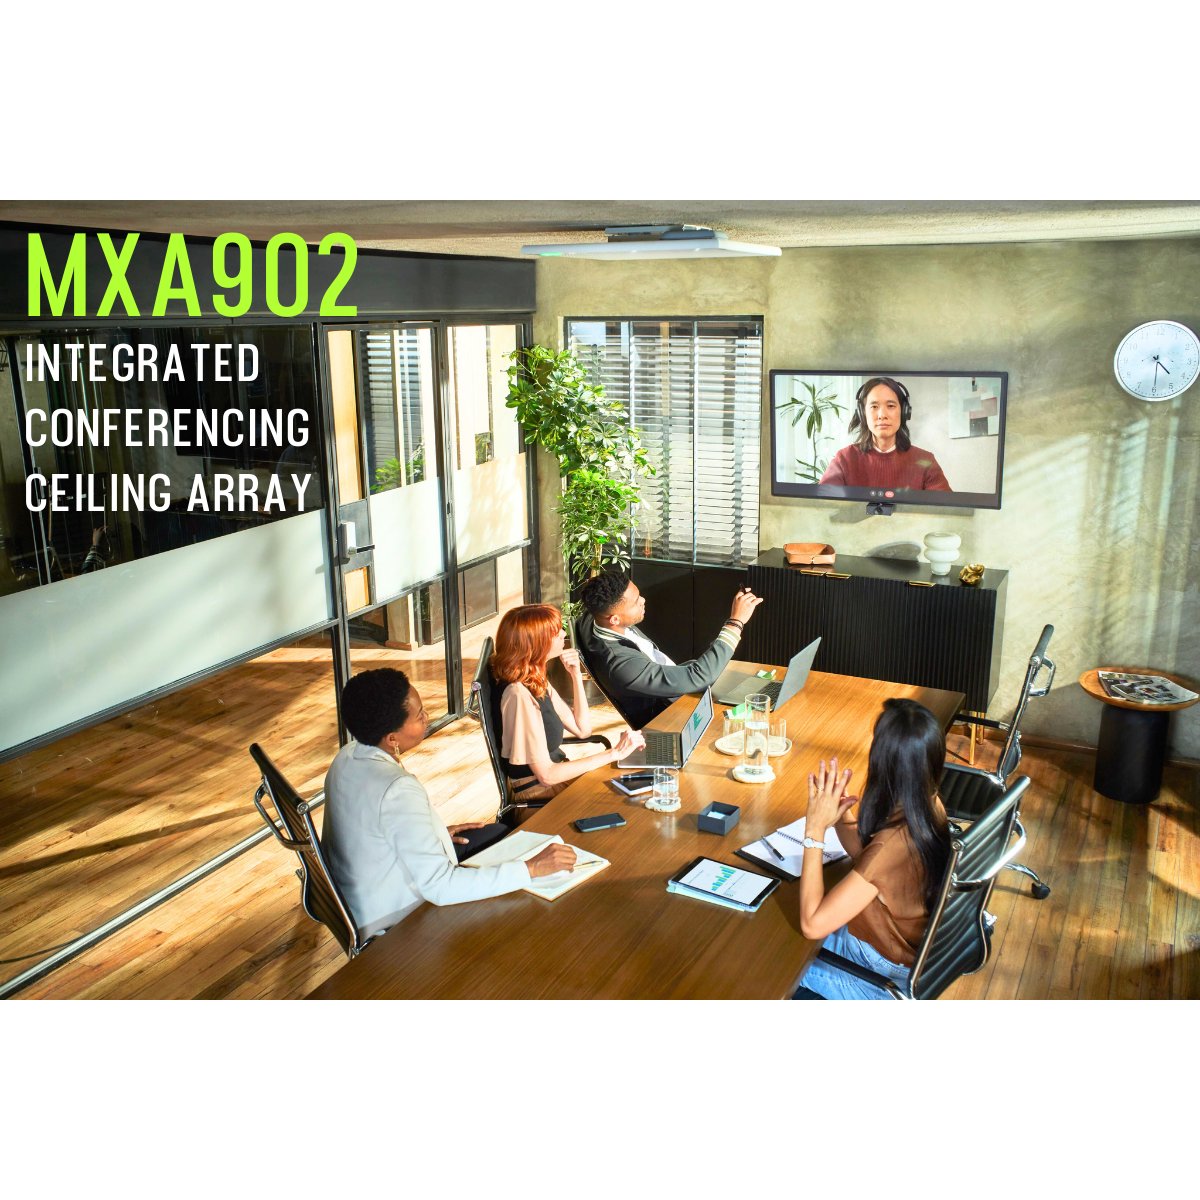 The Shure MXA902 - the all-in-one microphone, loudspeaker & DSP integrated ceiling array - is In stock & ready to ship! It's the fastest way to better sound. is.gd/2UZwv8 #ShureSystems #FirstOfItsKind #raisebar #NewProduct #AVTweeps #ProAV #allinoneconferencing